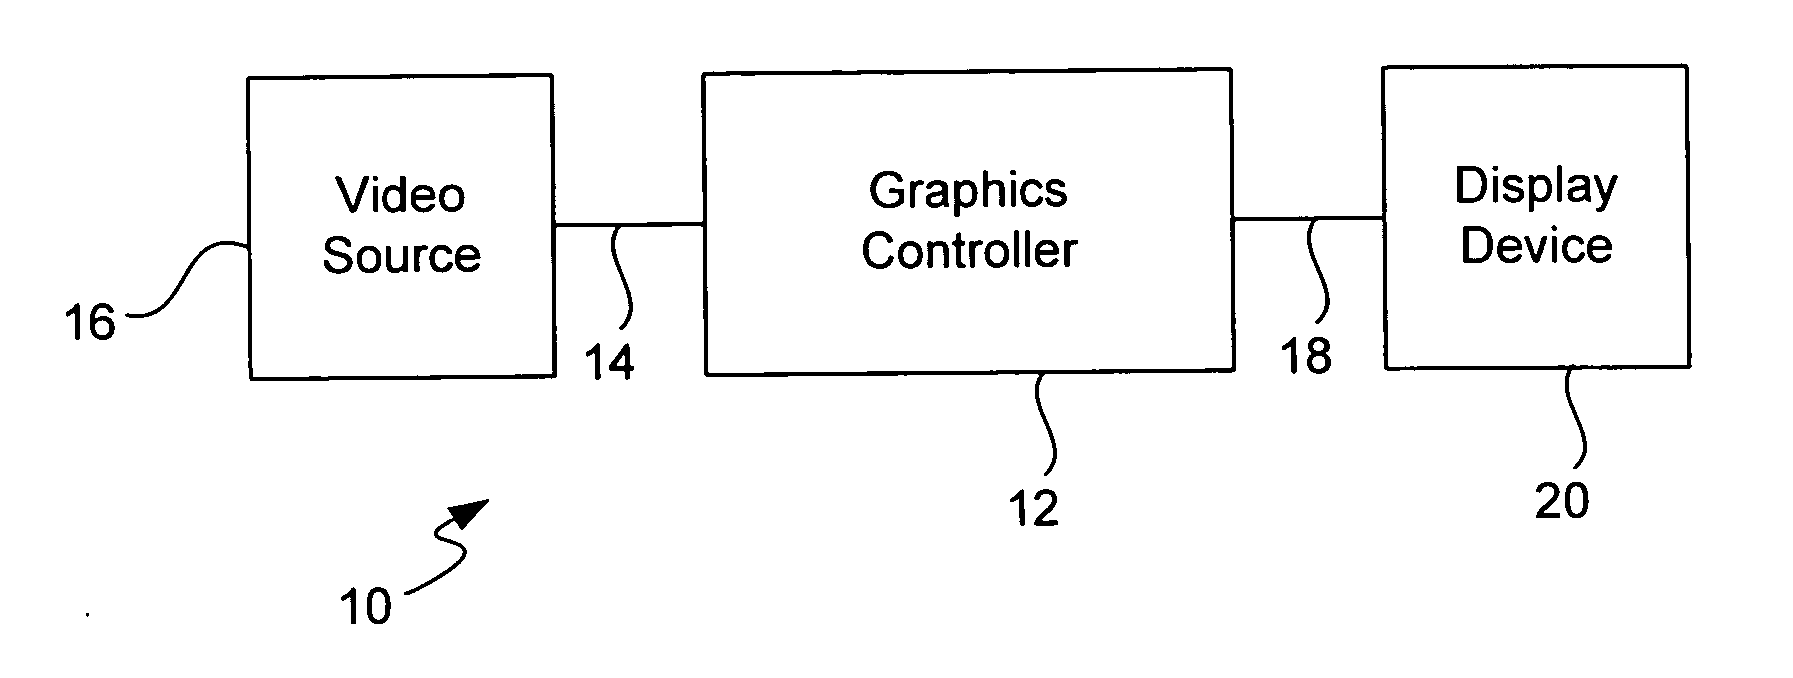 Apparatus and method for processing synch signals in graphic controllers